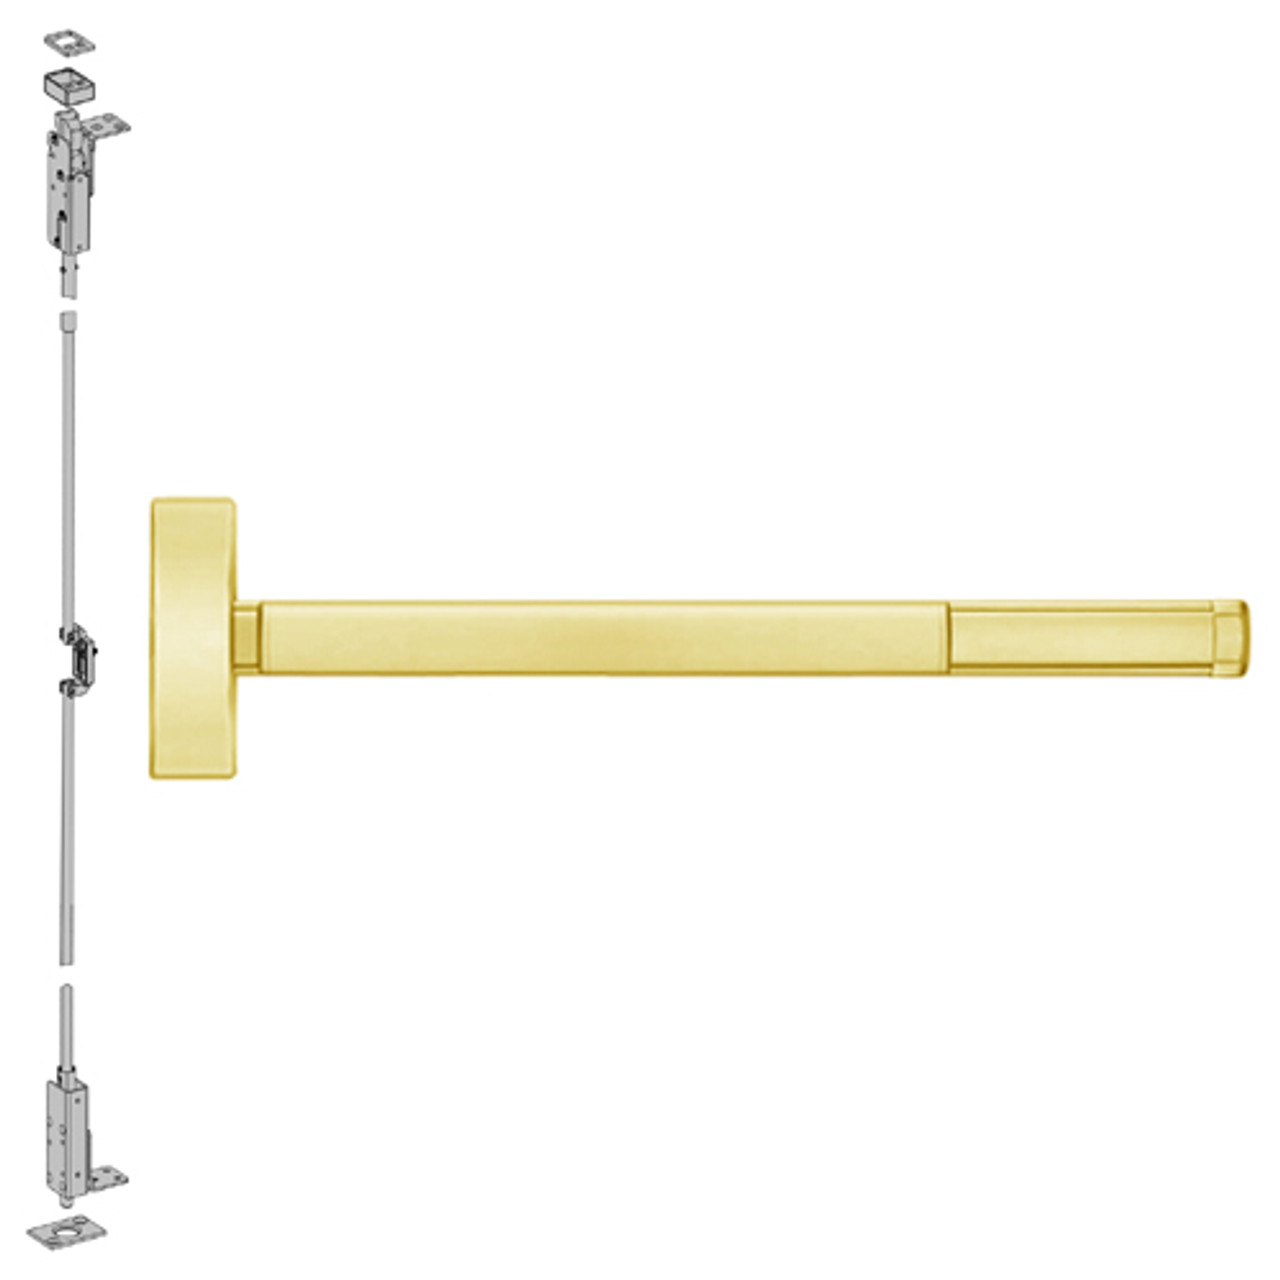 ELRFL2715-605-48 PHI 2700 Series Wood Door Concealed Vertical Exit Device with Electric Latch Retraction Prepped for Thumbpiece Always Active in Bright Brass Finish